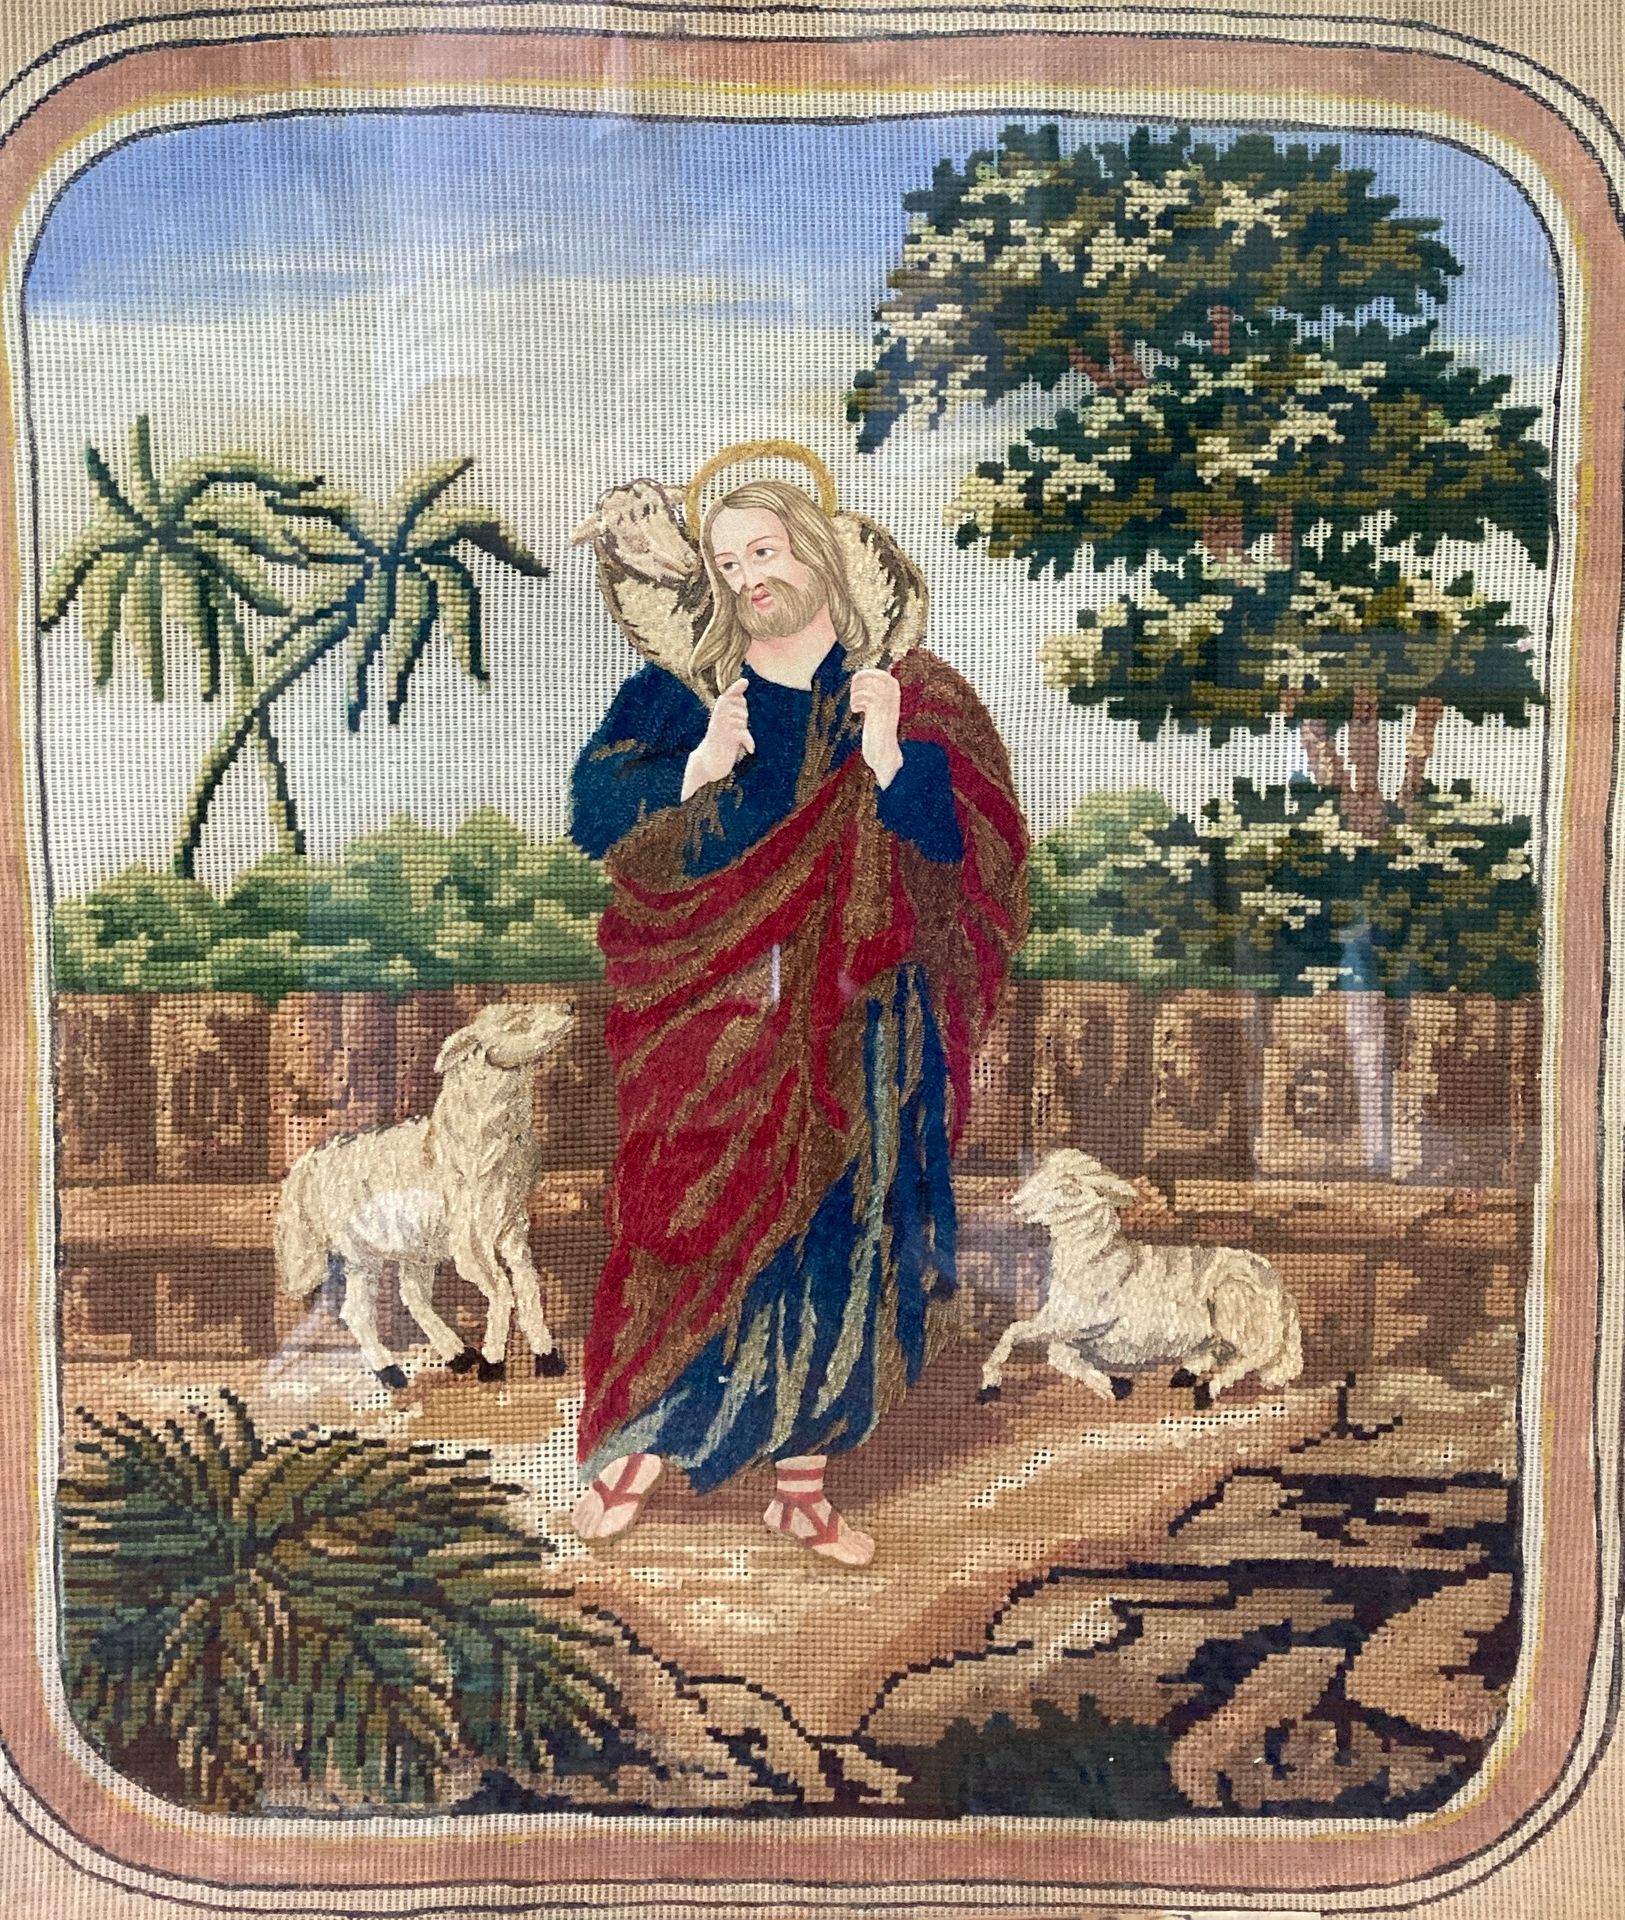 Null Polychrome embroidery "The Good Shepherd" in a wood and gilded stucco frame&hellip;